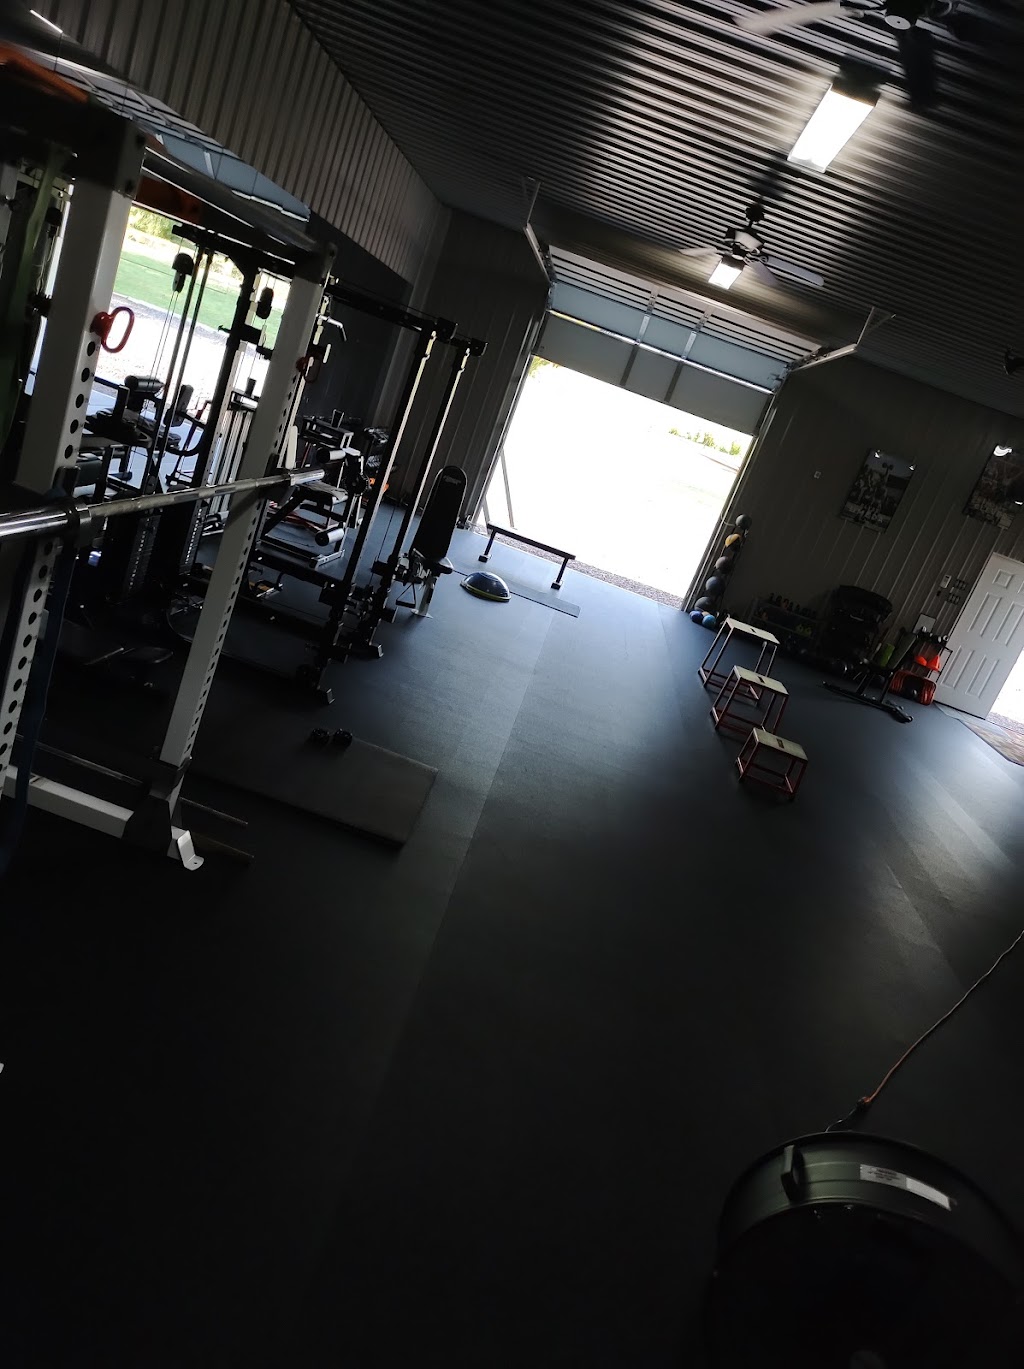 Knuckle Burning Fitness | 93 Trappe Rd, Collegeville, PA 19426 | Phone: (484) 390-1253